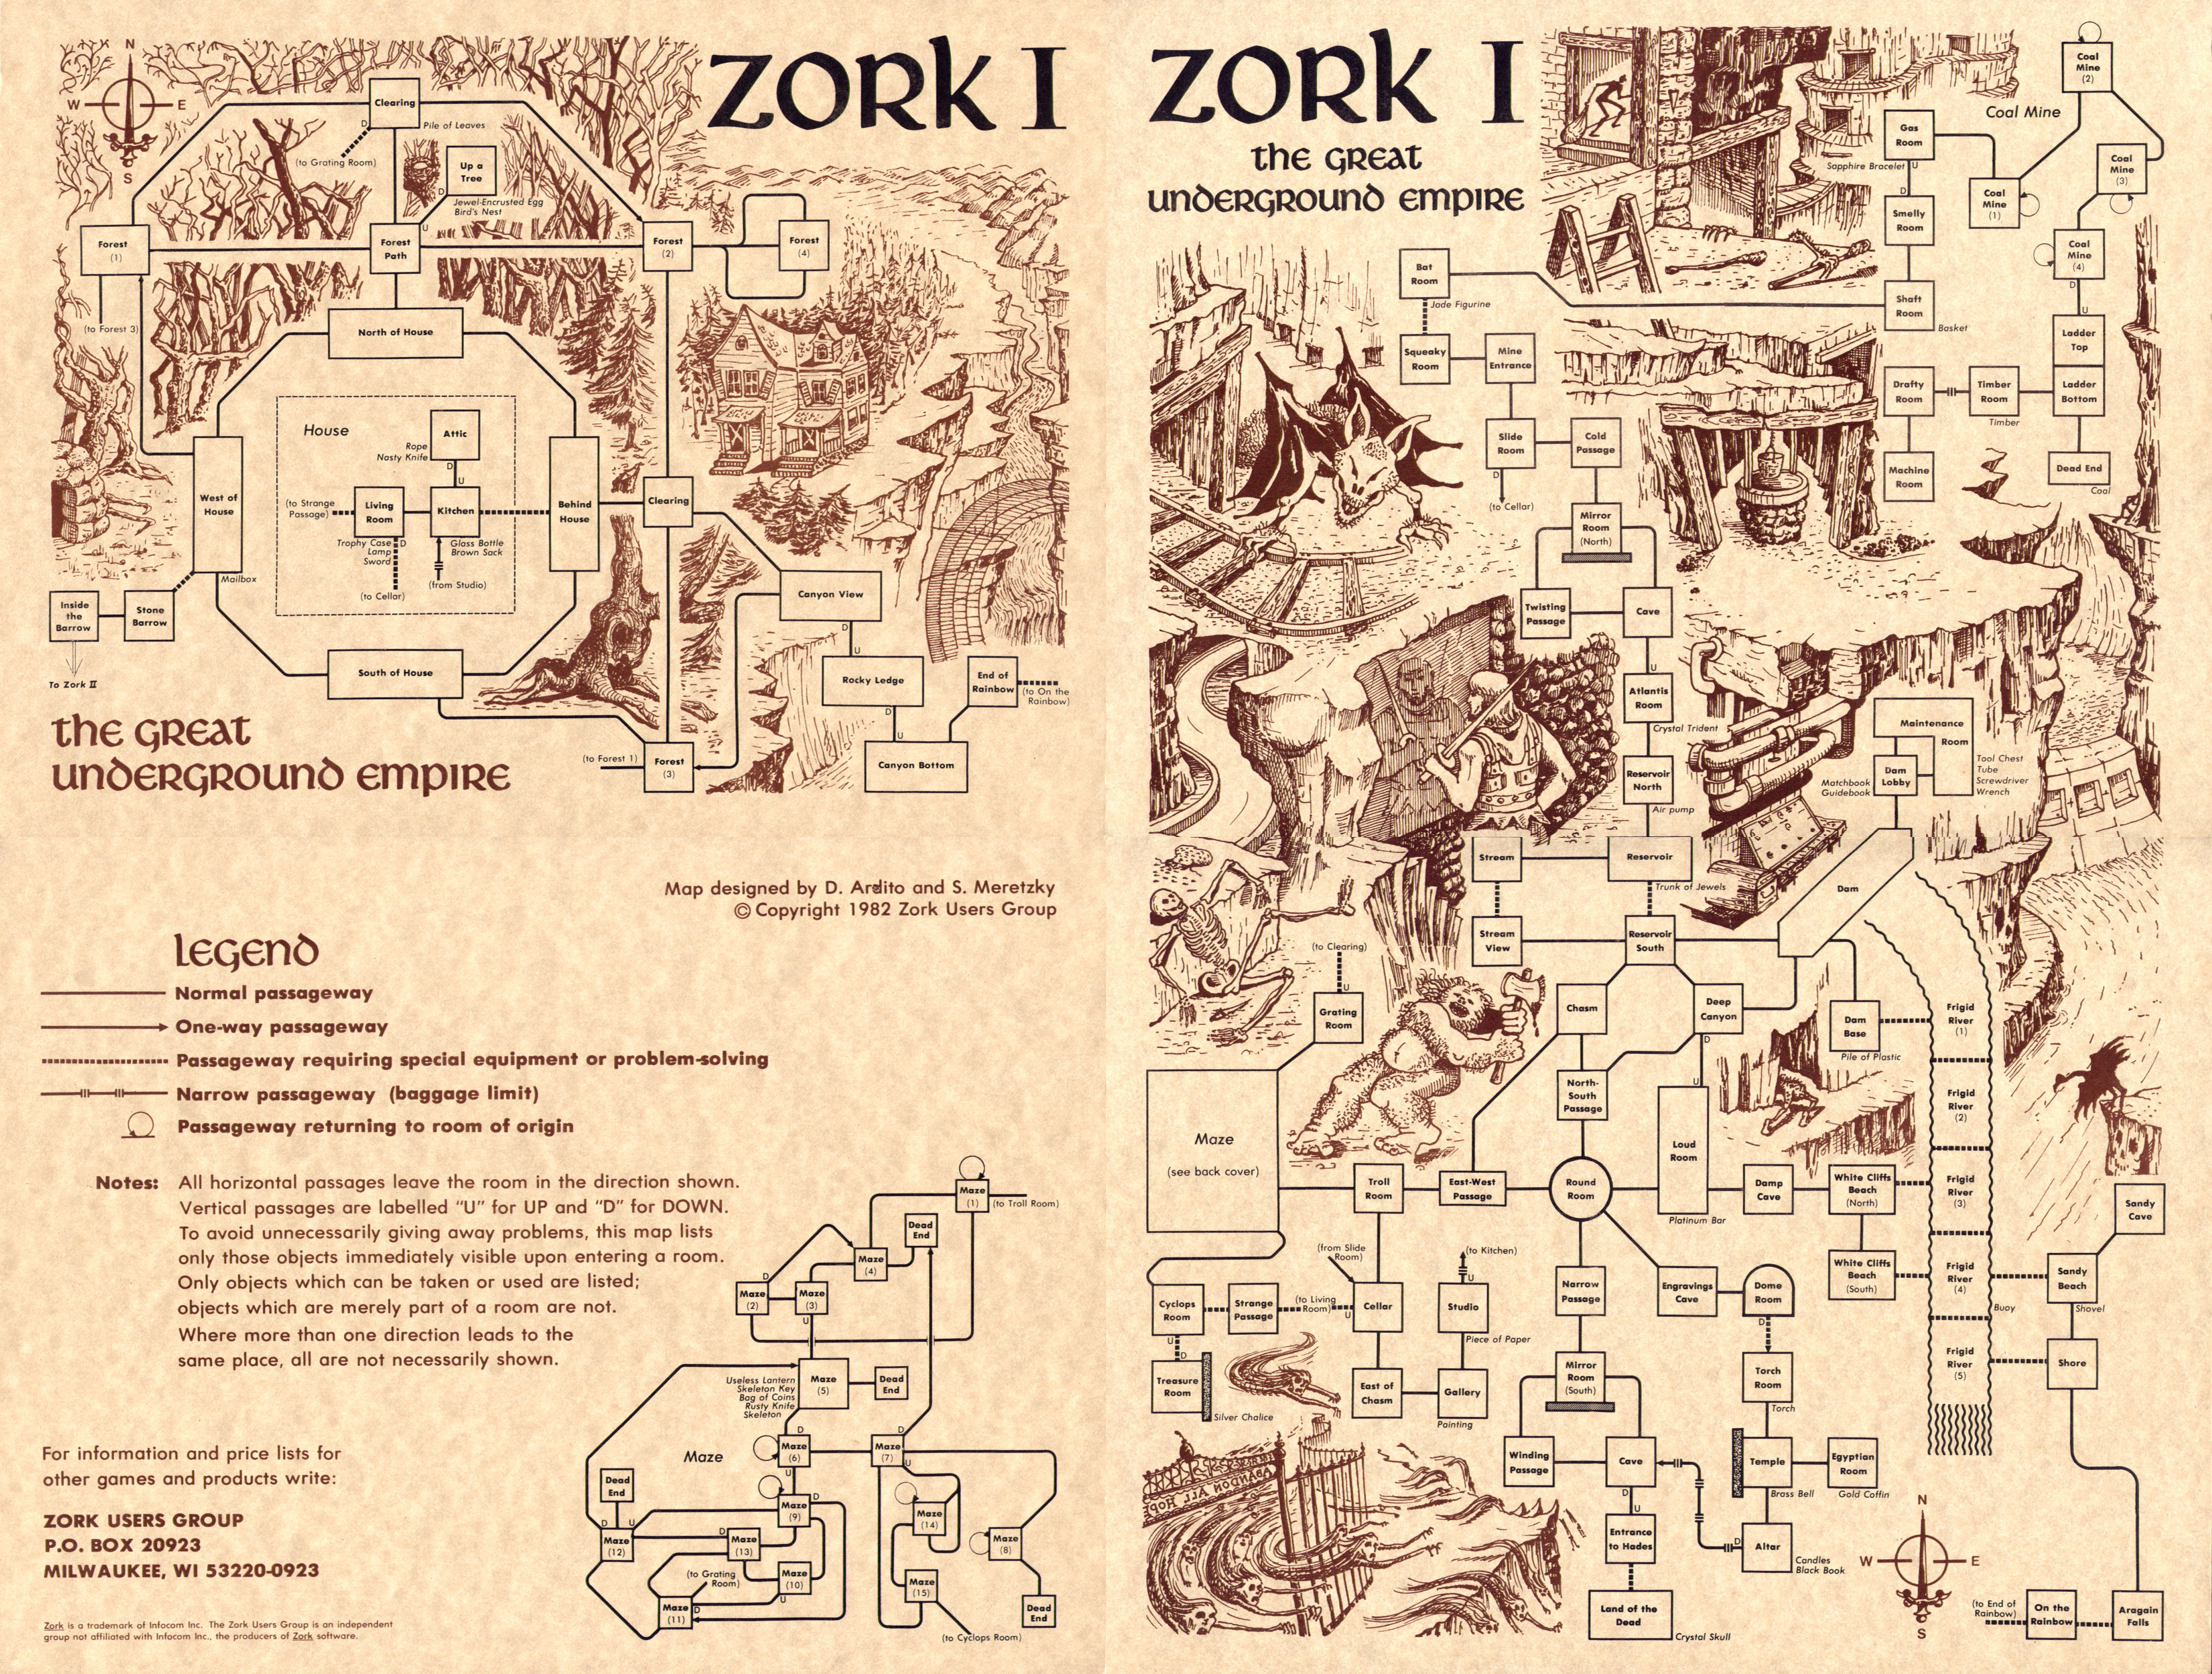 Zork User's Group map of Zork I, a computer adventure game by Infocom